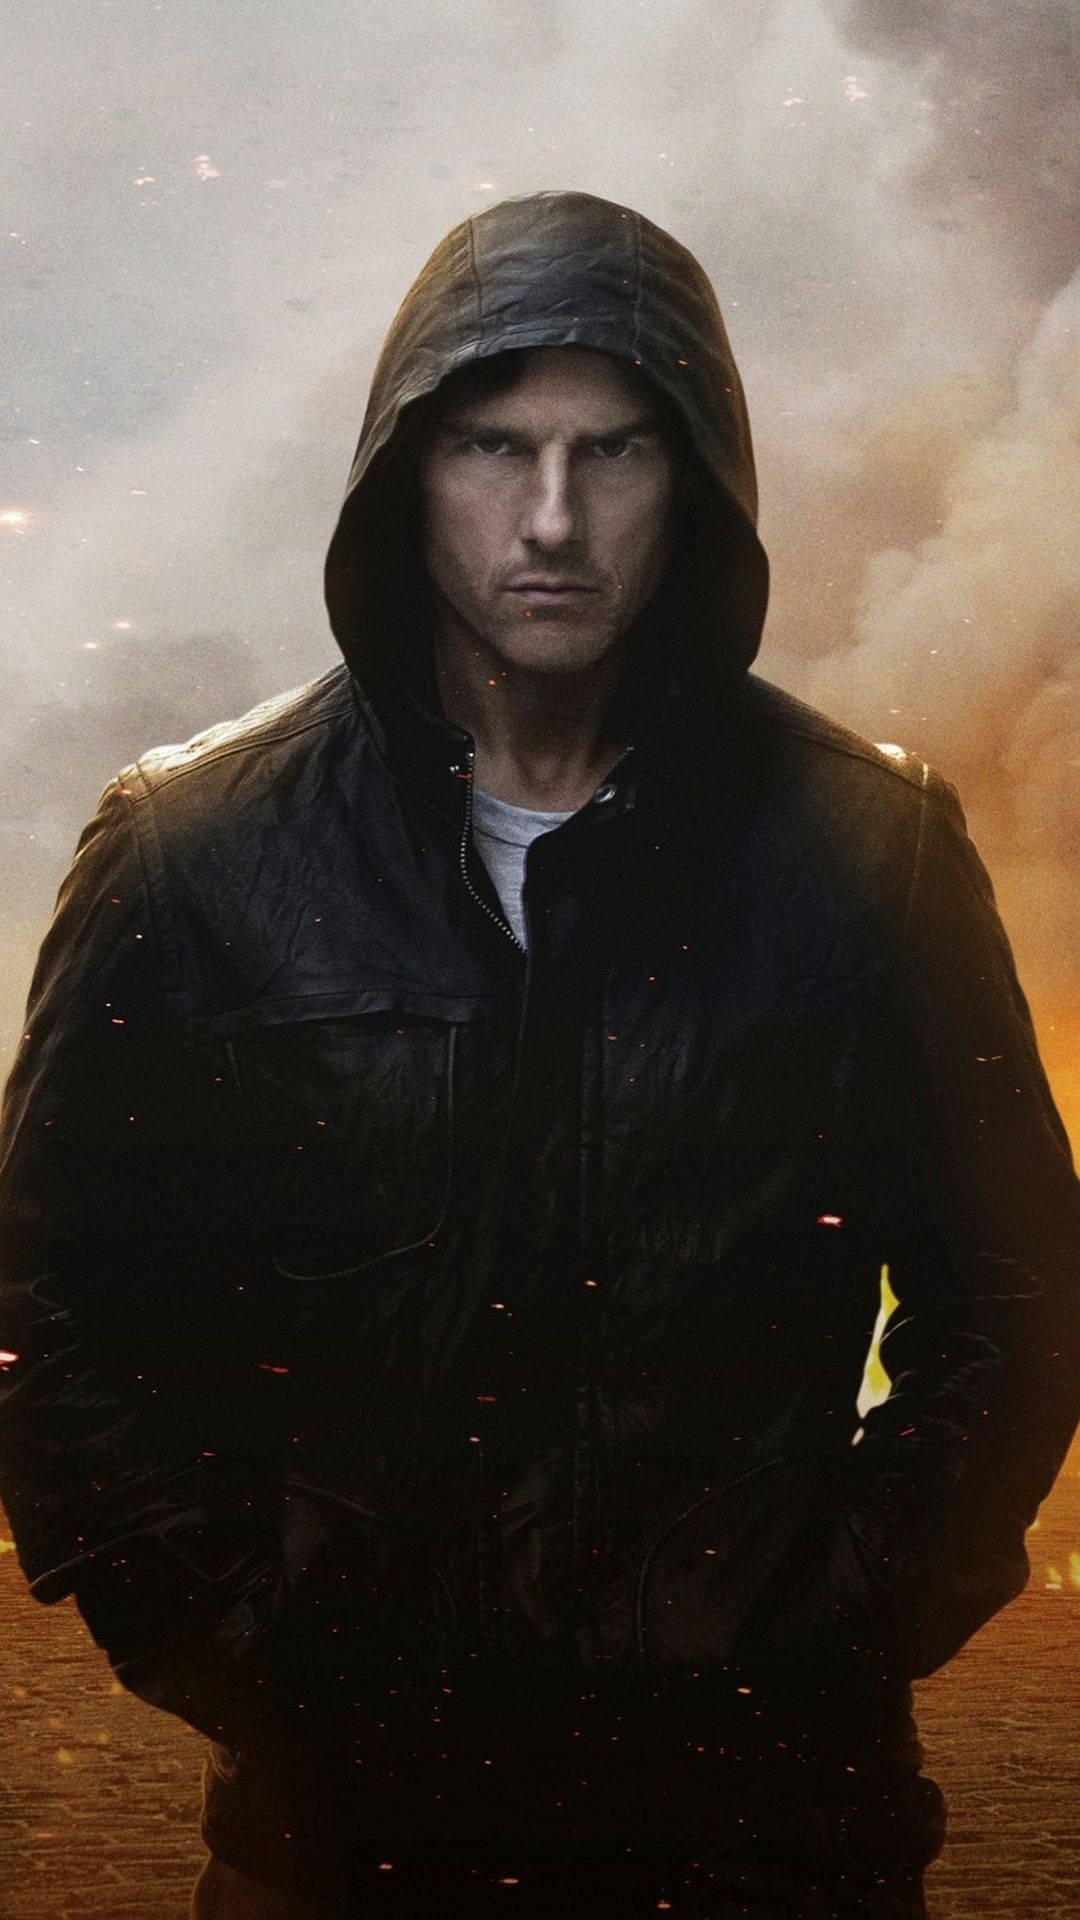 Tom Cruise phone wallpapers, Top images, Mobile background, Famous actor, 1080x1920 Full HD Phone